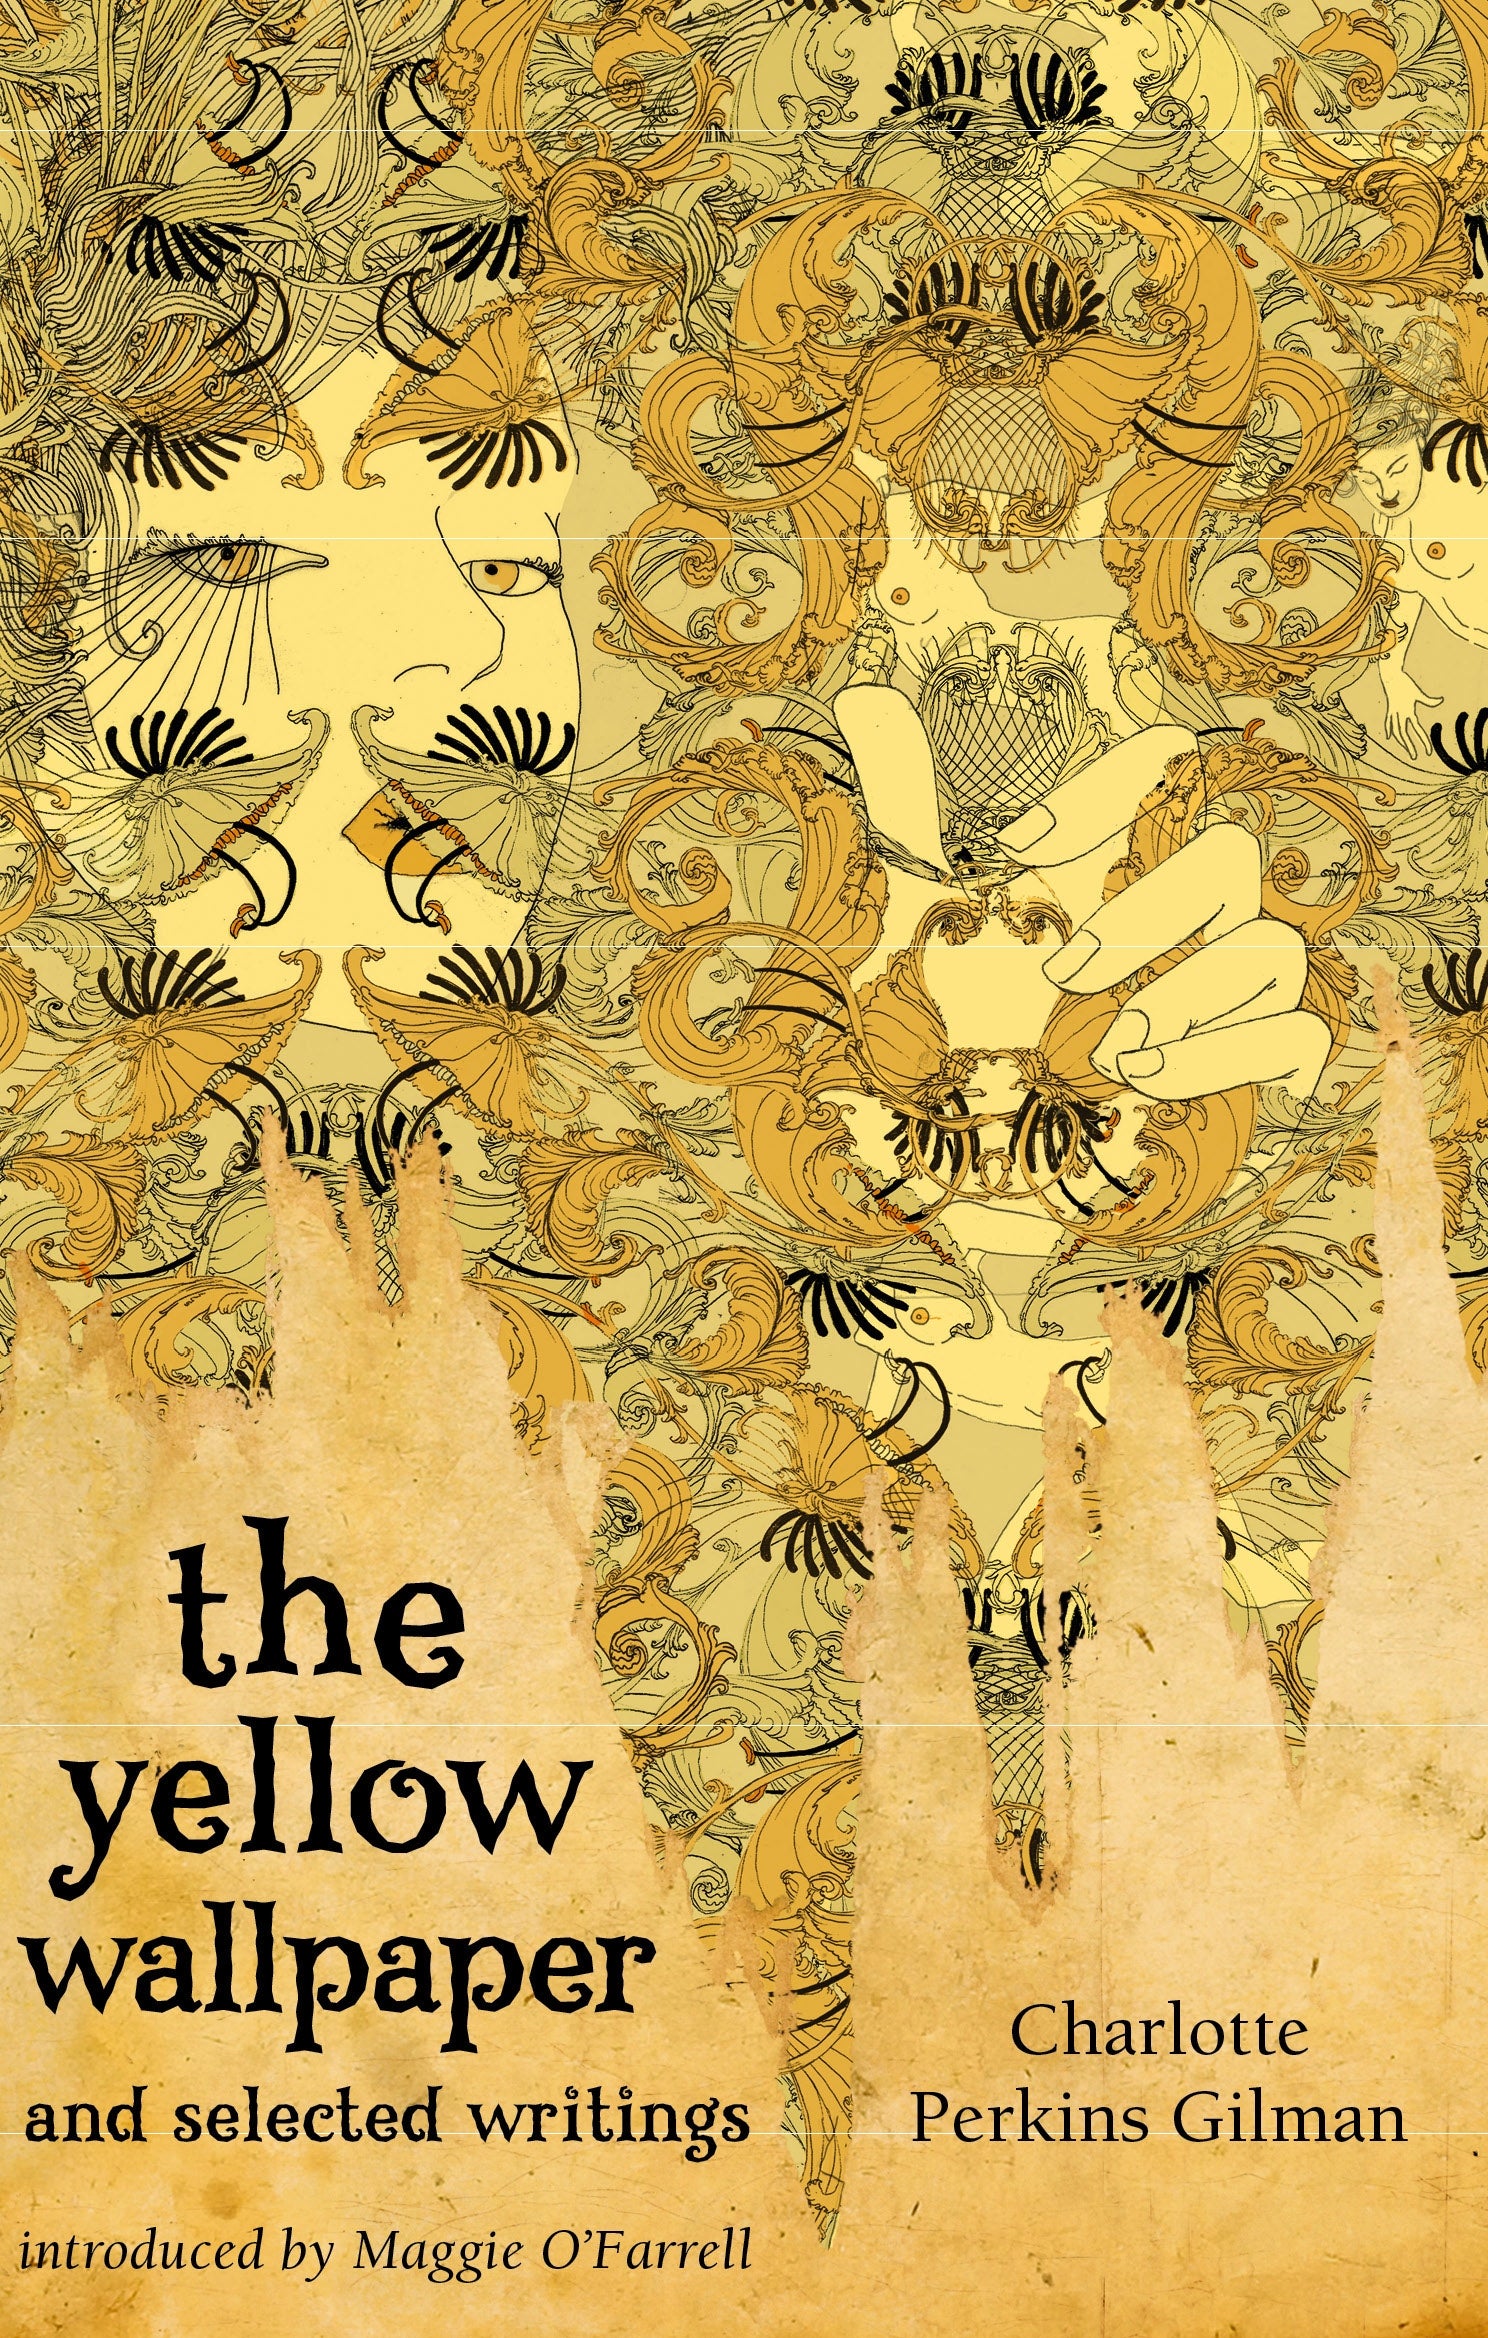 The Yellow Wallpaper And Selected Writings by Charlotte Perkins Gilman